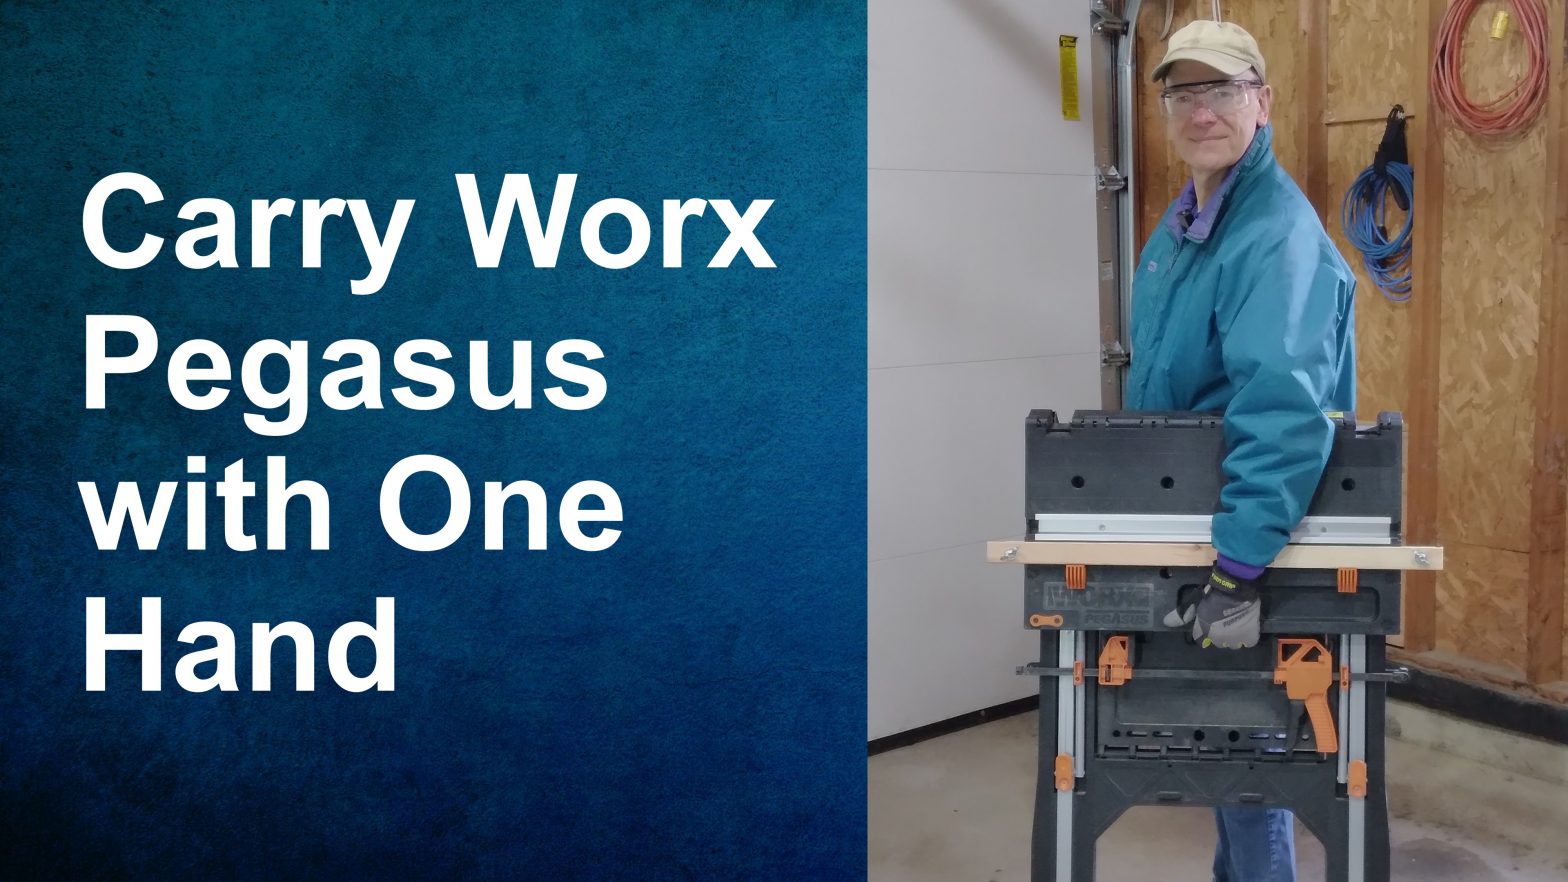 Solve the carrying problem with the Worx Pegasus; Simple way to carry it with just one hand